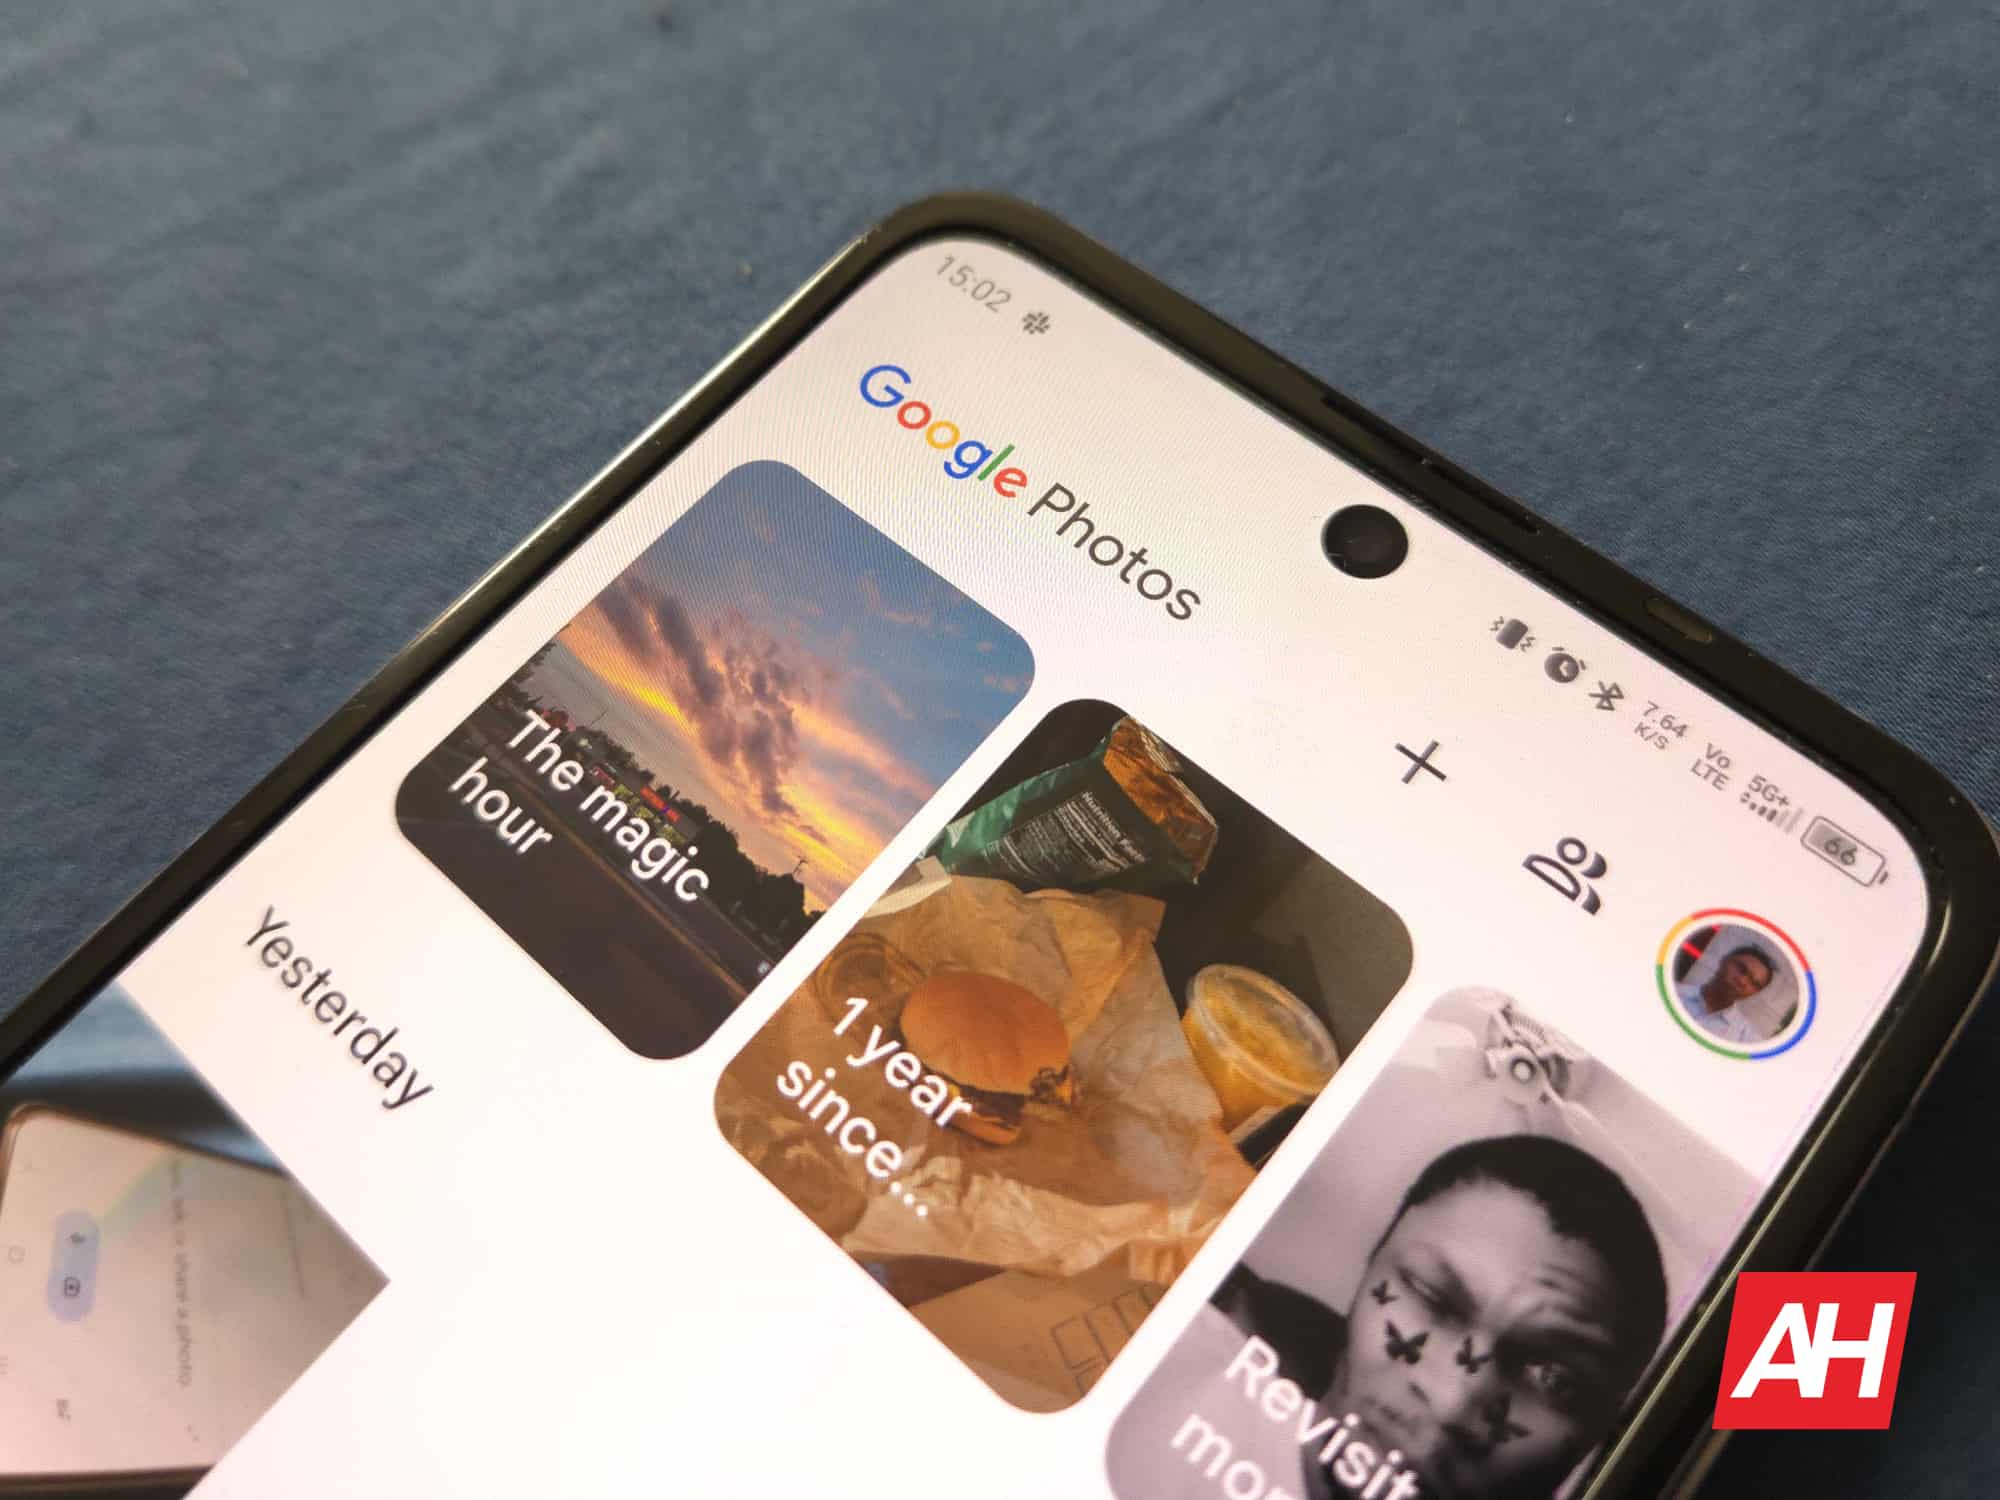 Soon you'll be able to hide all backed up memes in Google Photos